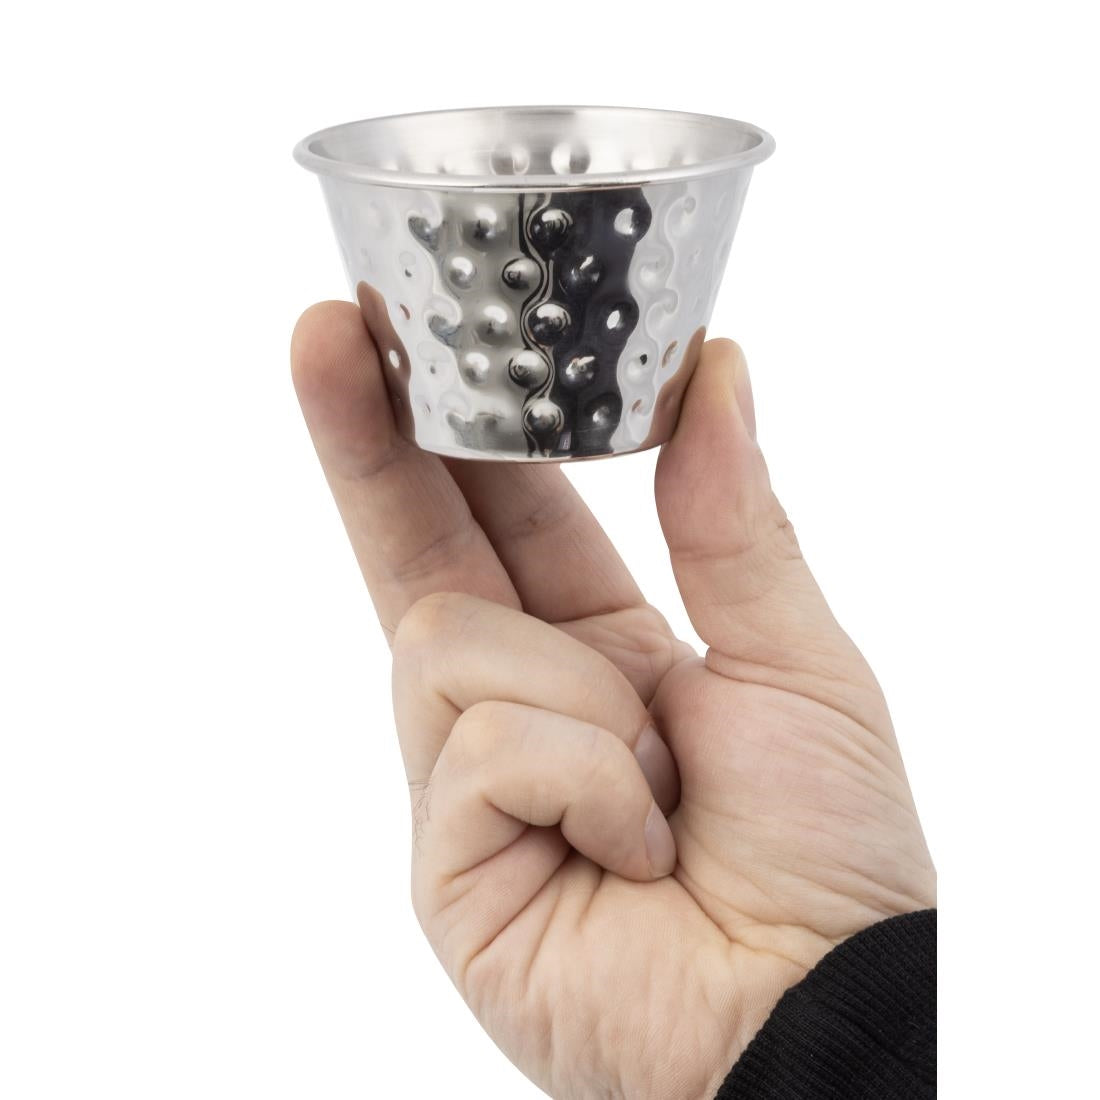 FU290 Olympia Hammered Stainless Steel Sauce Cups 115ml (Pack of 12)